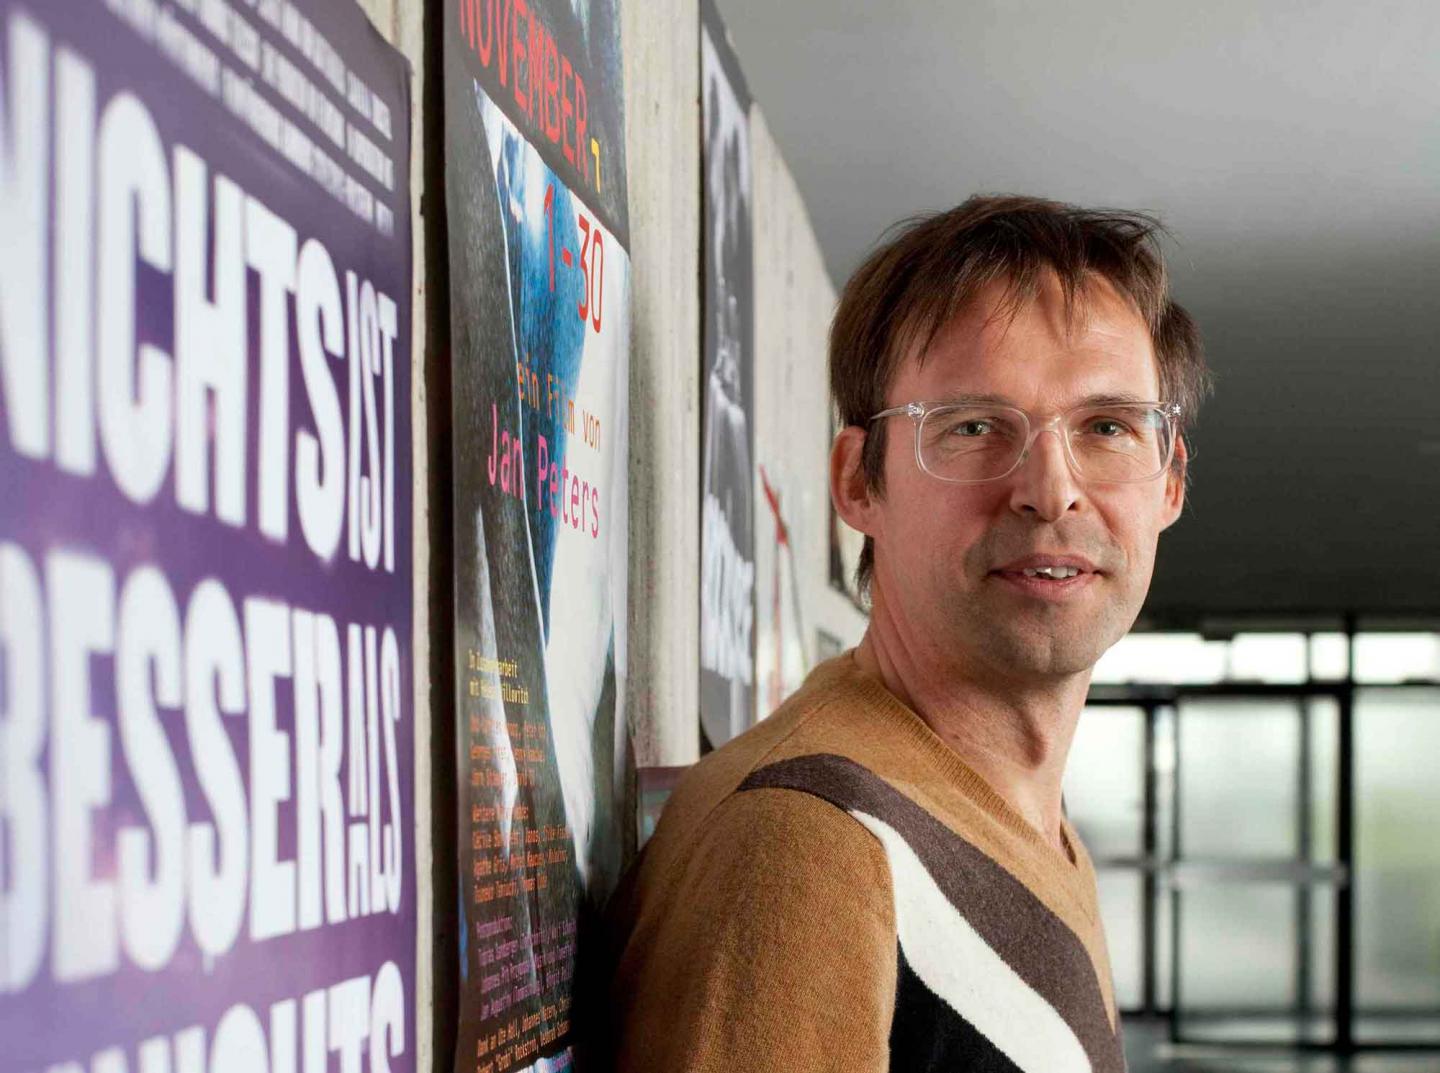 CERN welcomes its first filmmaker in residence